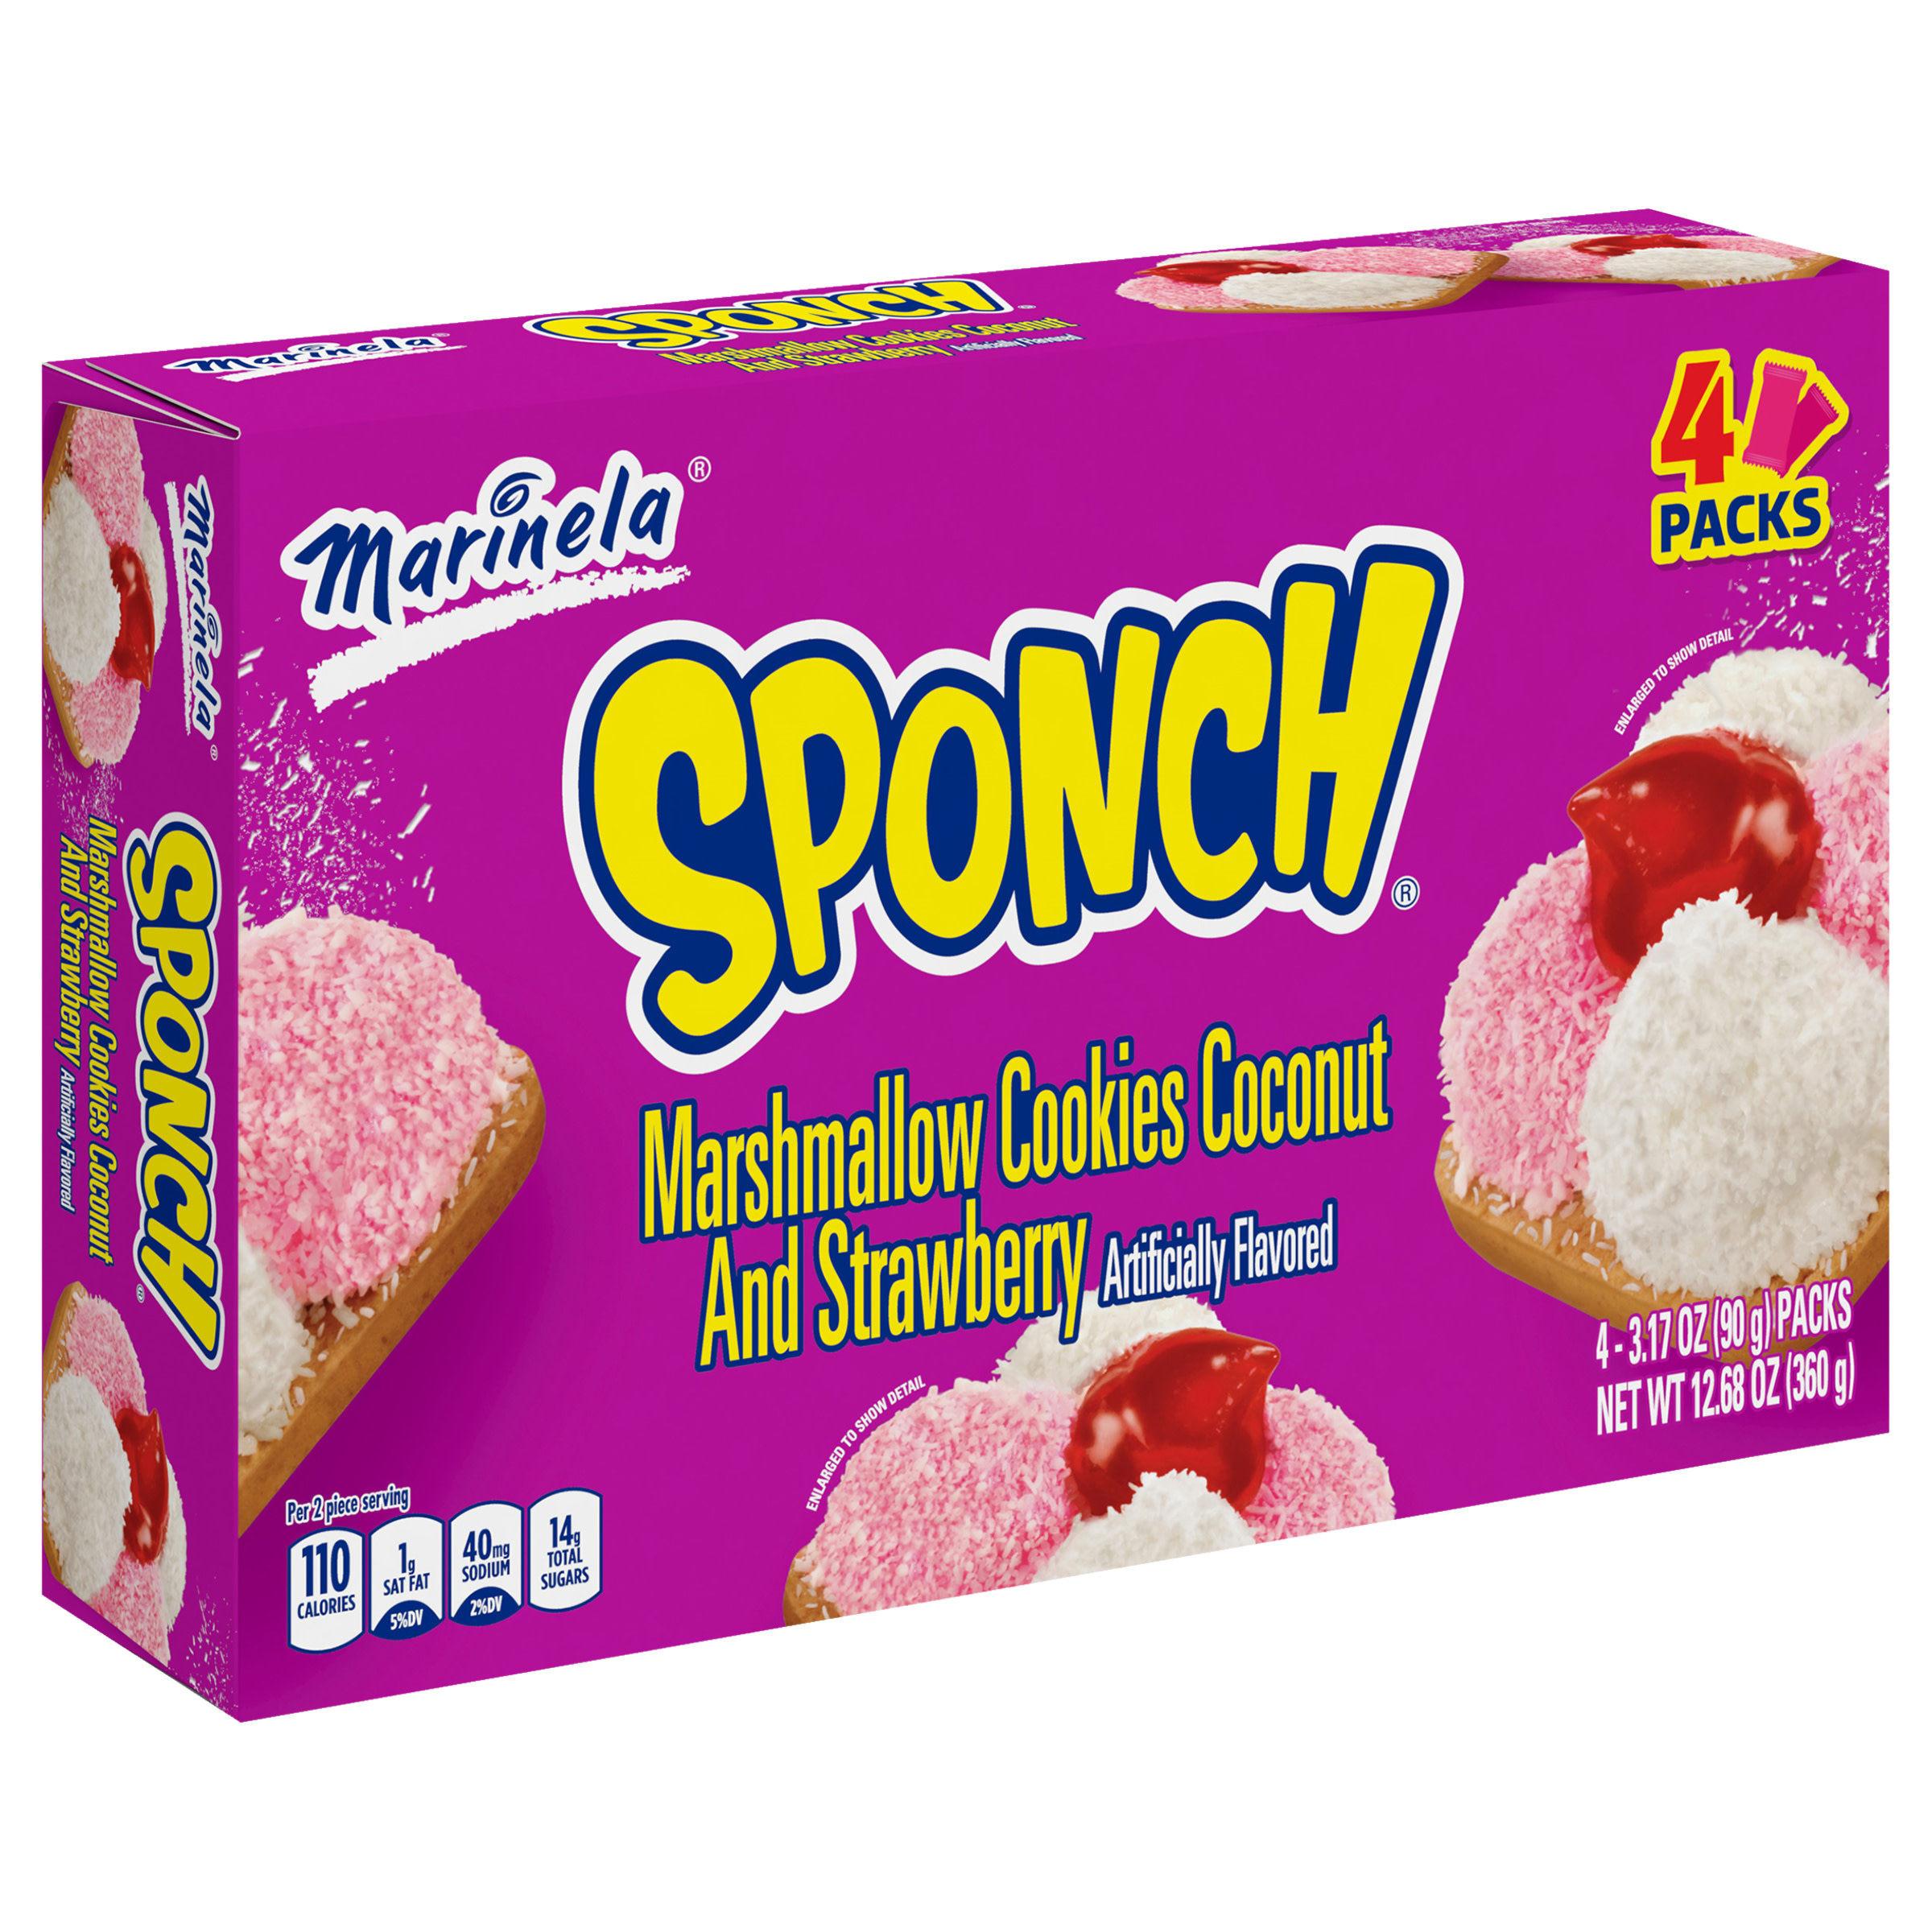 Marinela Sponch Marshmallow Cookies, 4 count, 12.68 oz - image 4 of 7